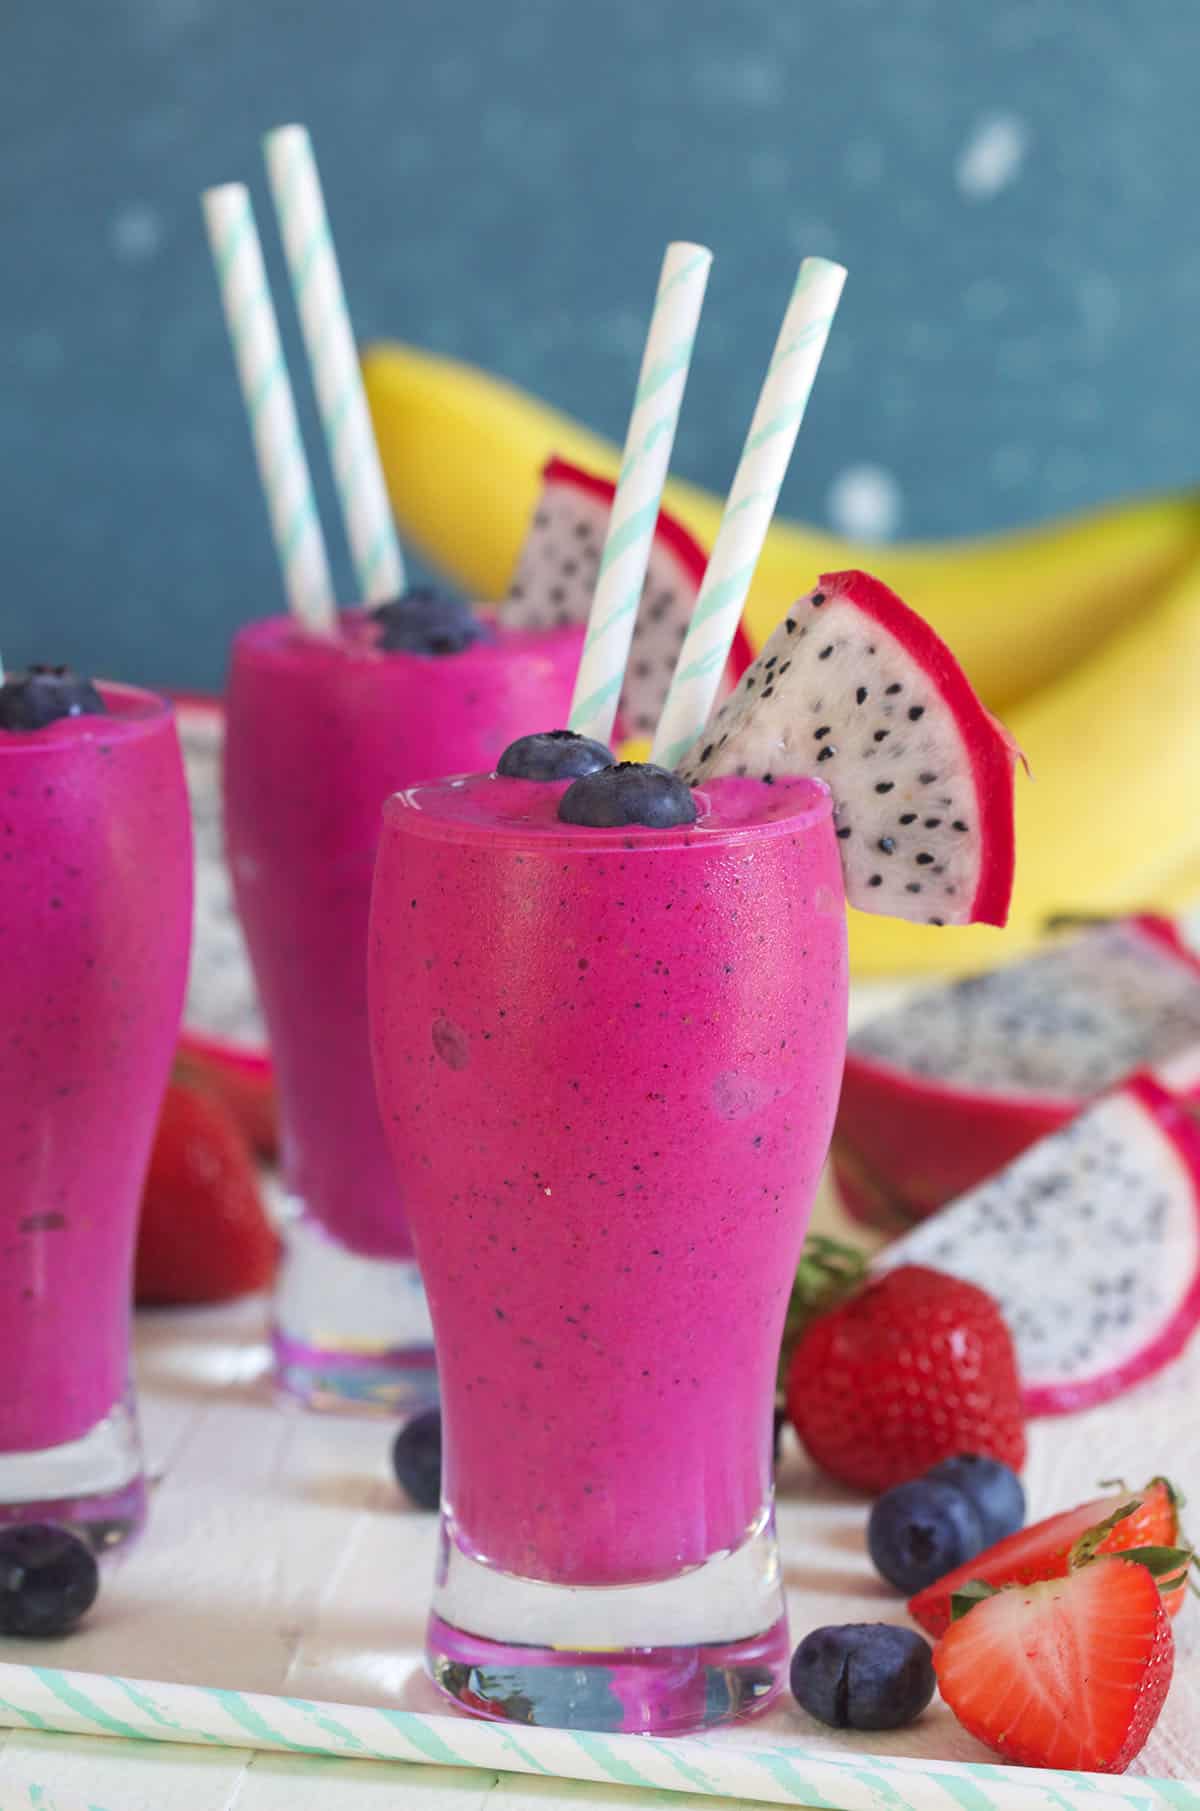 Several vibrant colored smoothies are presented on a white surface.